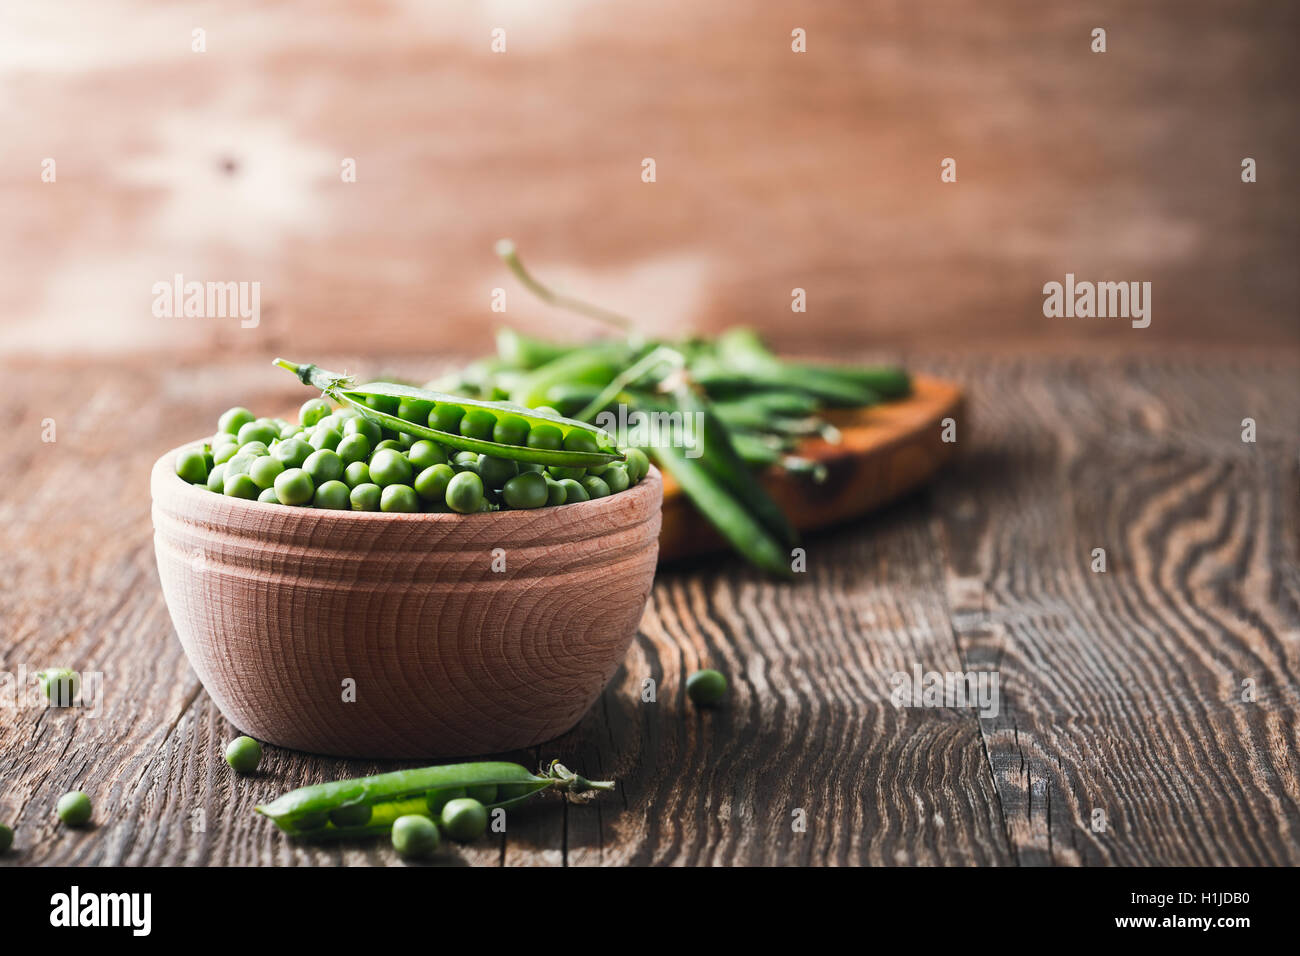 Green peas in wooden bowl on rustic background, harvest time Stock Photo